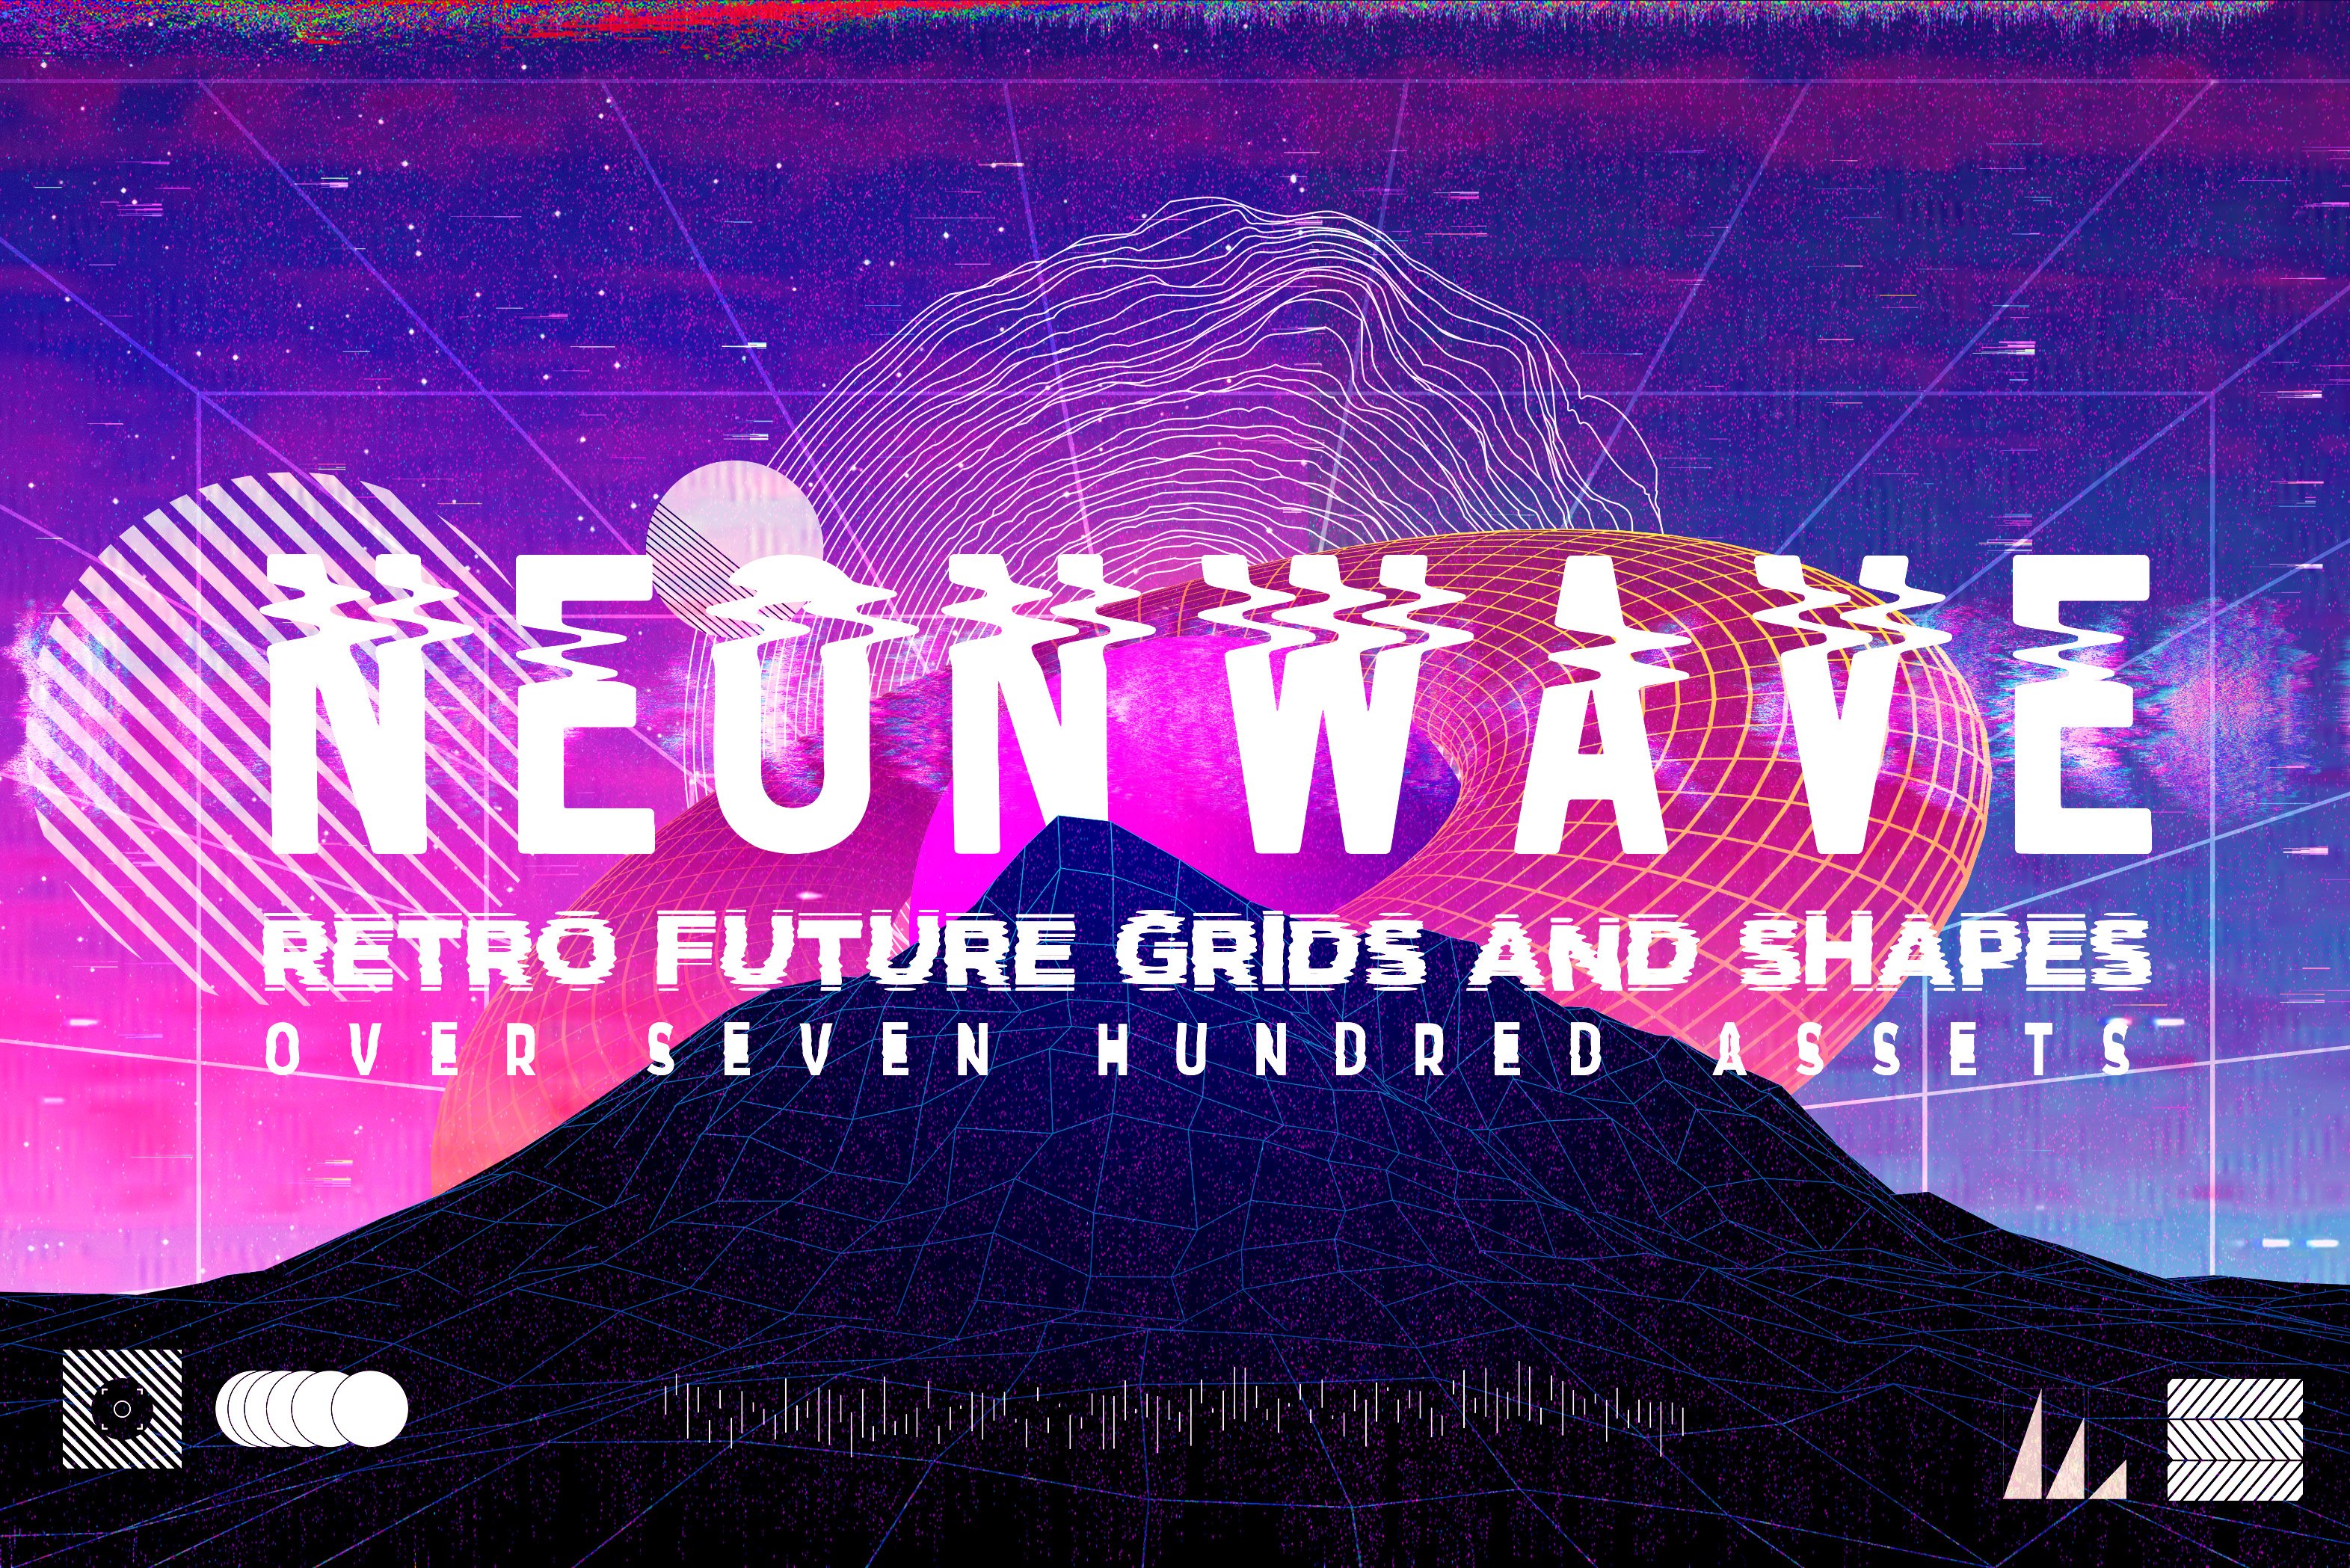 NeonWave Retro Future Grids & Shapes preview image.